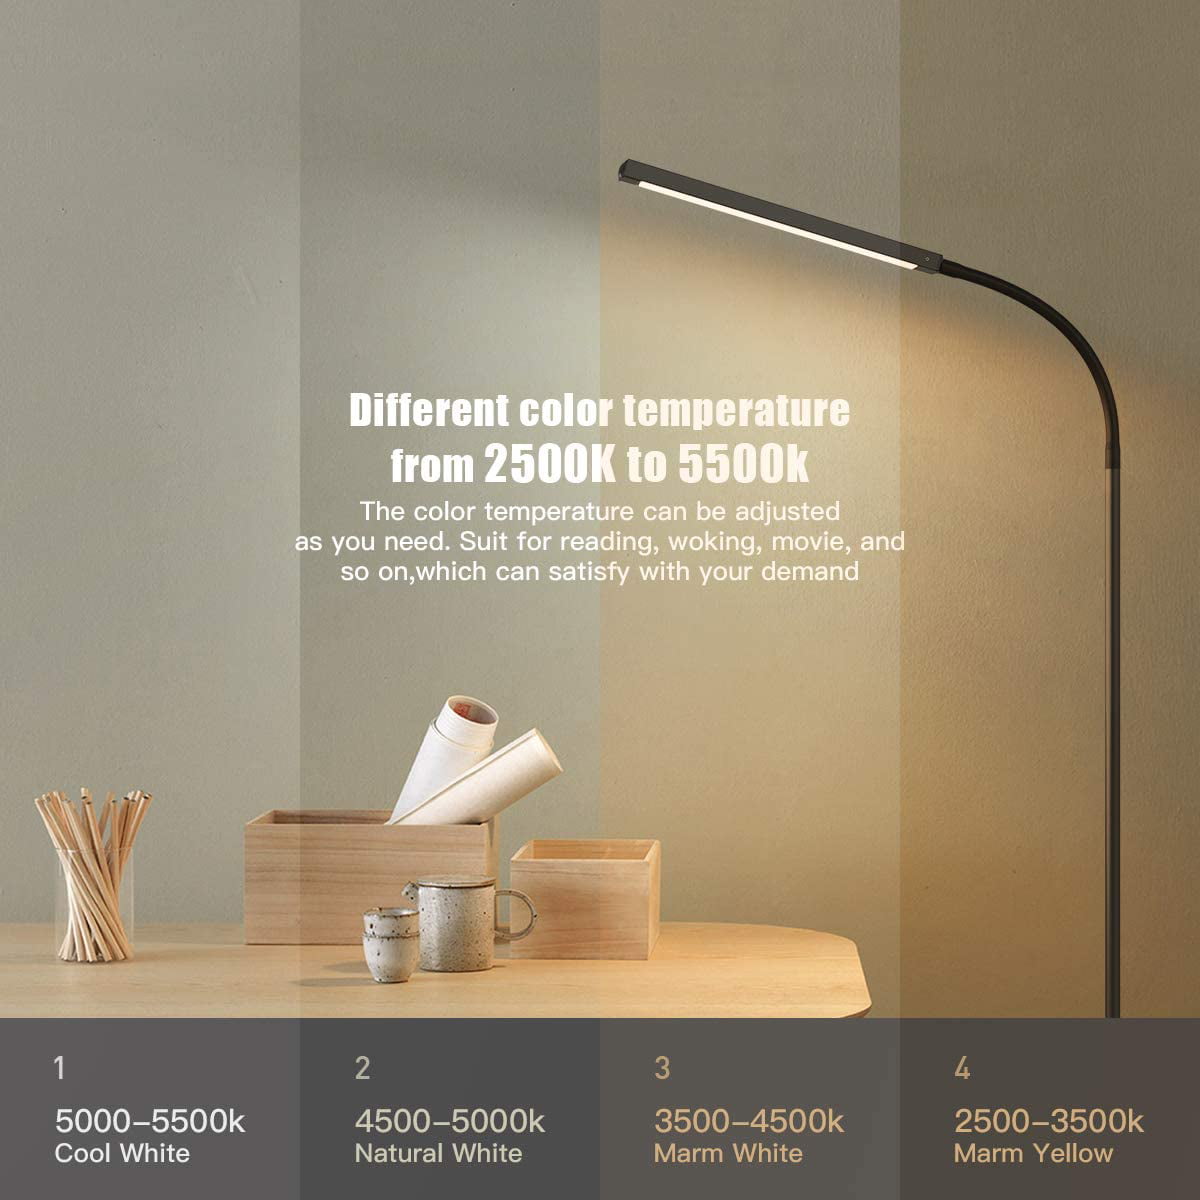 Floor Lamp,Adjustable 2-in-1 Multifunctional LED Floor Lamp & Desk Lamp Programmable Timer Floor Lamp with Stepless Dimmer & 4 Color Temperatures,Reading Standing Lamp for Living Room Bedroom Offic 